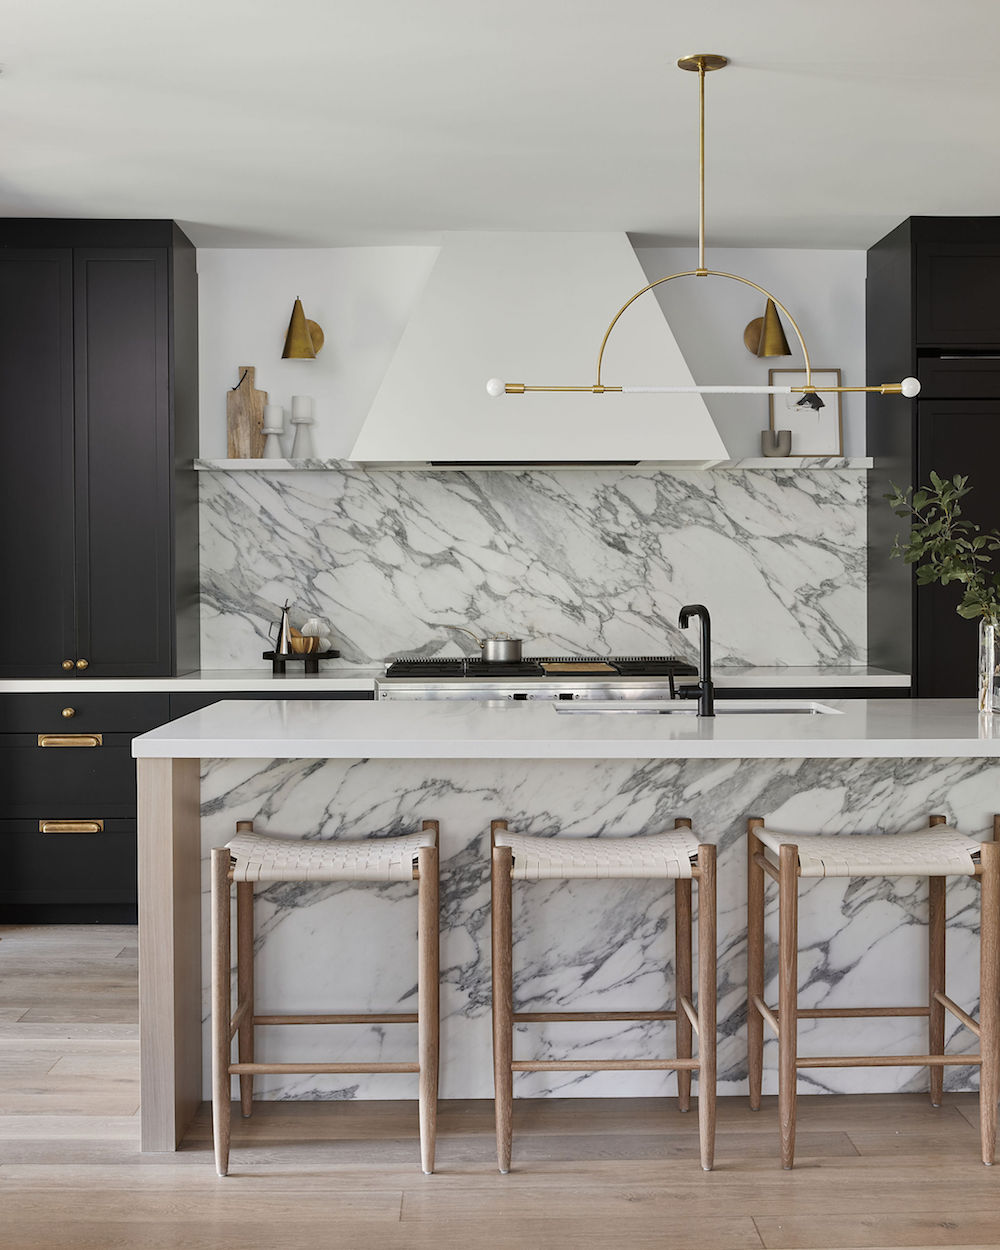 Marble kitchen with black cabinetry and pale wood